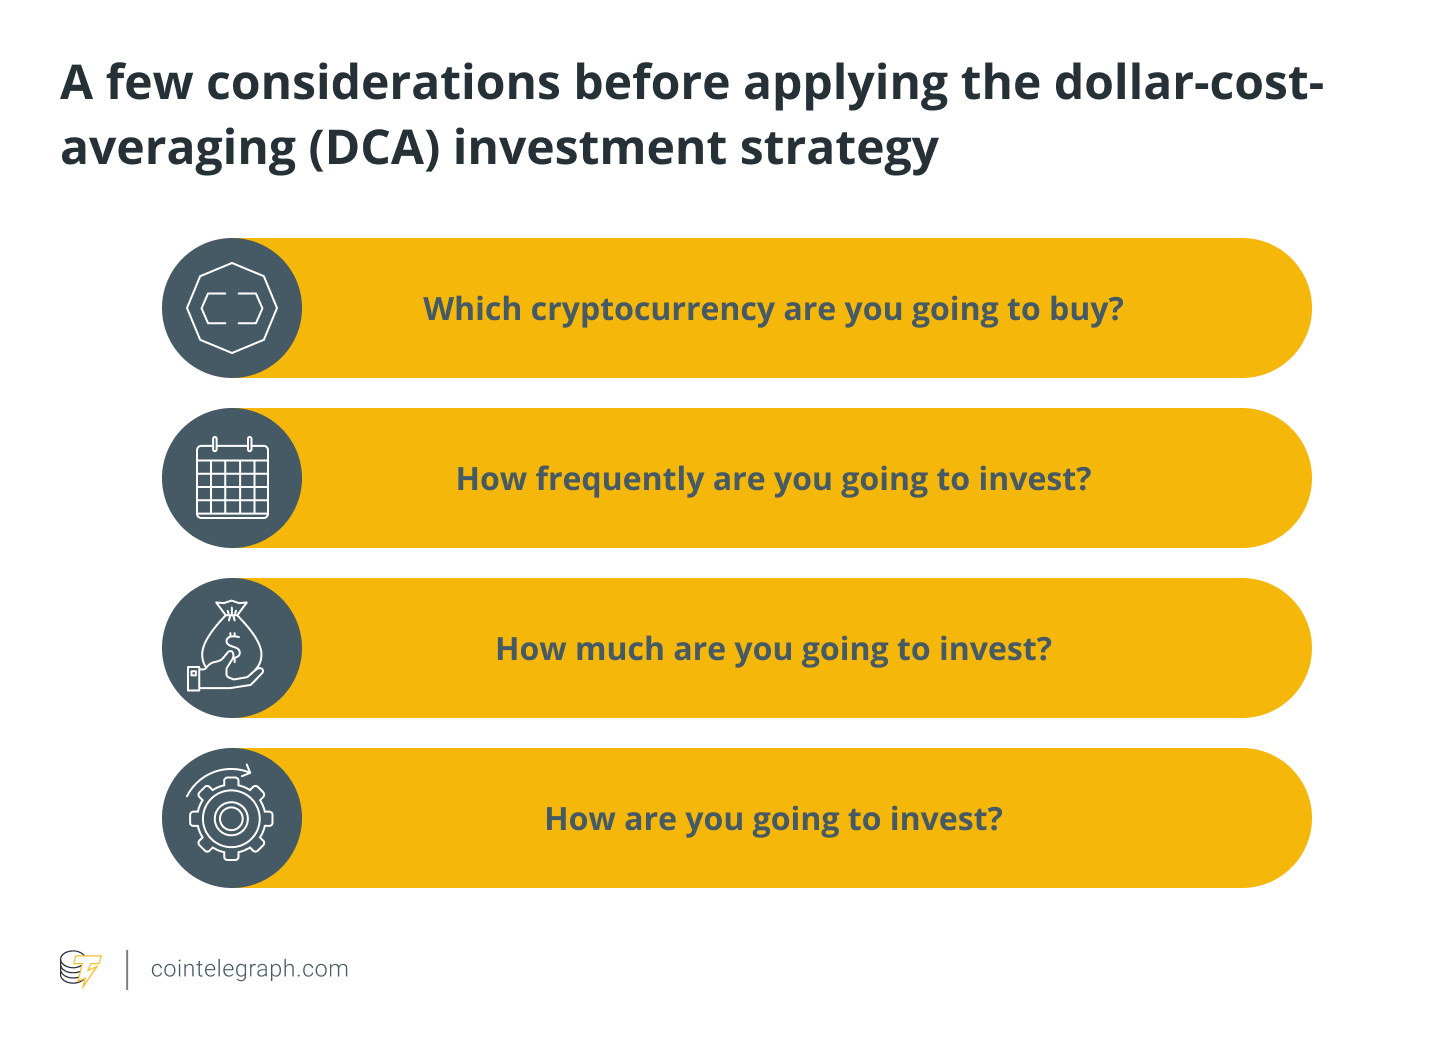 A few considerations before applying the dollar-cost-averaging (DCA) investment strategy